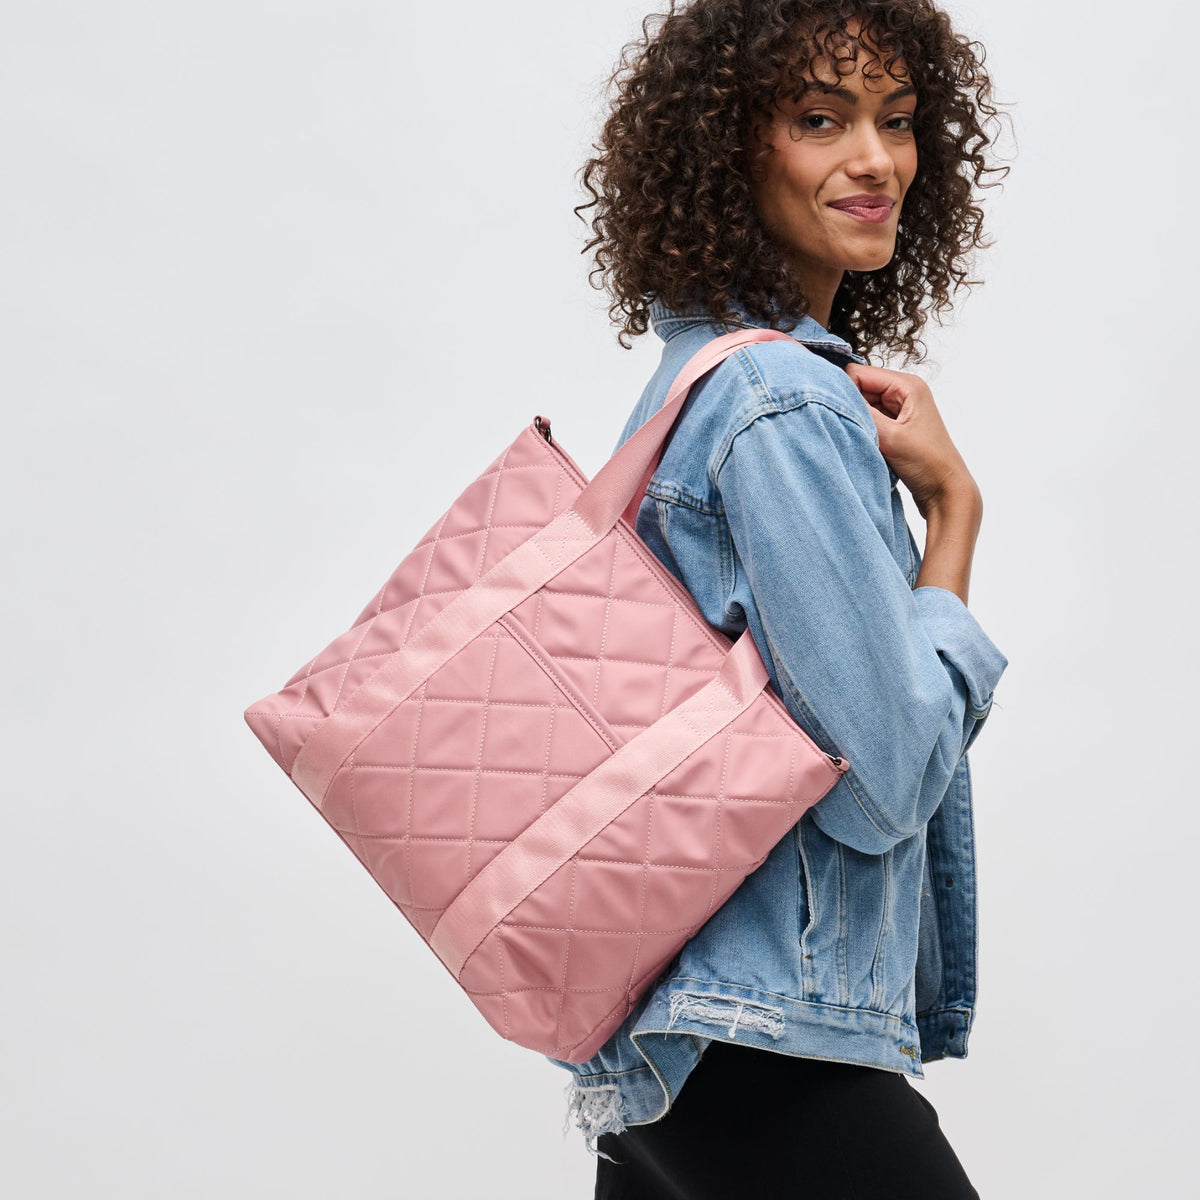 Woman wearing Pastel Pink Sol and Selene Motivator Carryall Tote 841764106955 View 1 | Pastel Pink